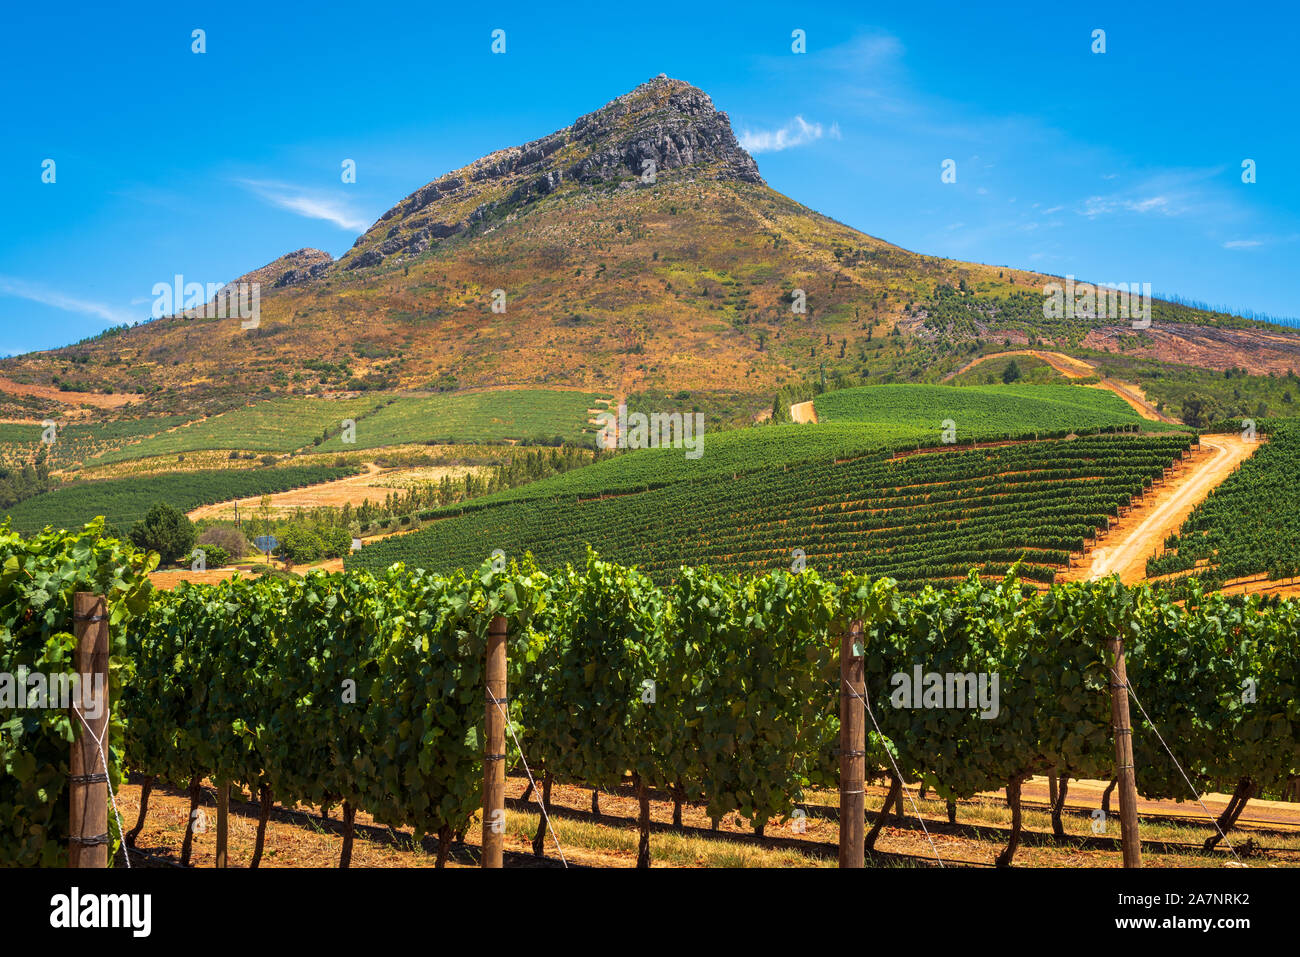 A ripening vineyard in the Stellenbosch Region in the Western Cape of South Africa. Stock Photo